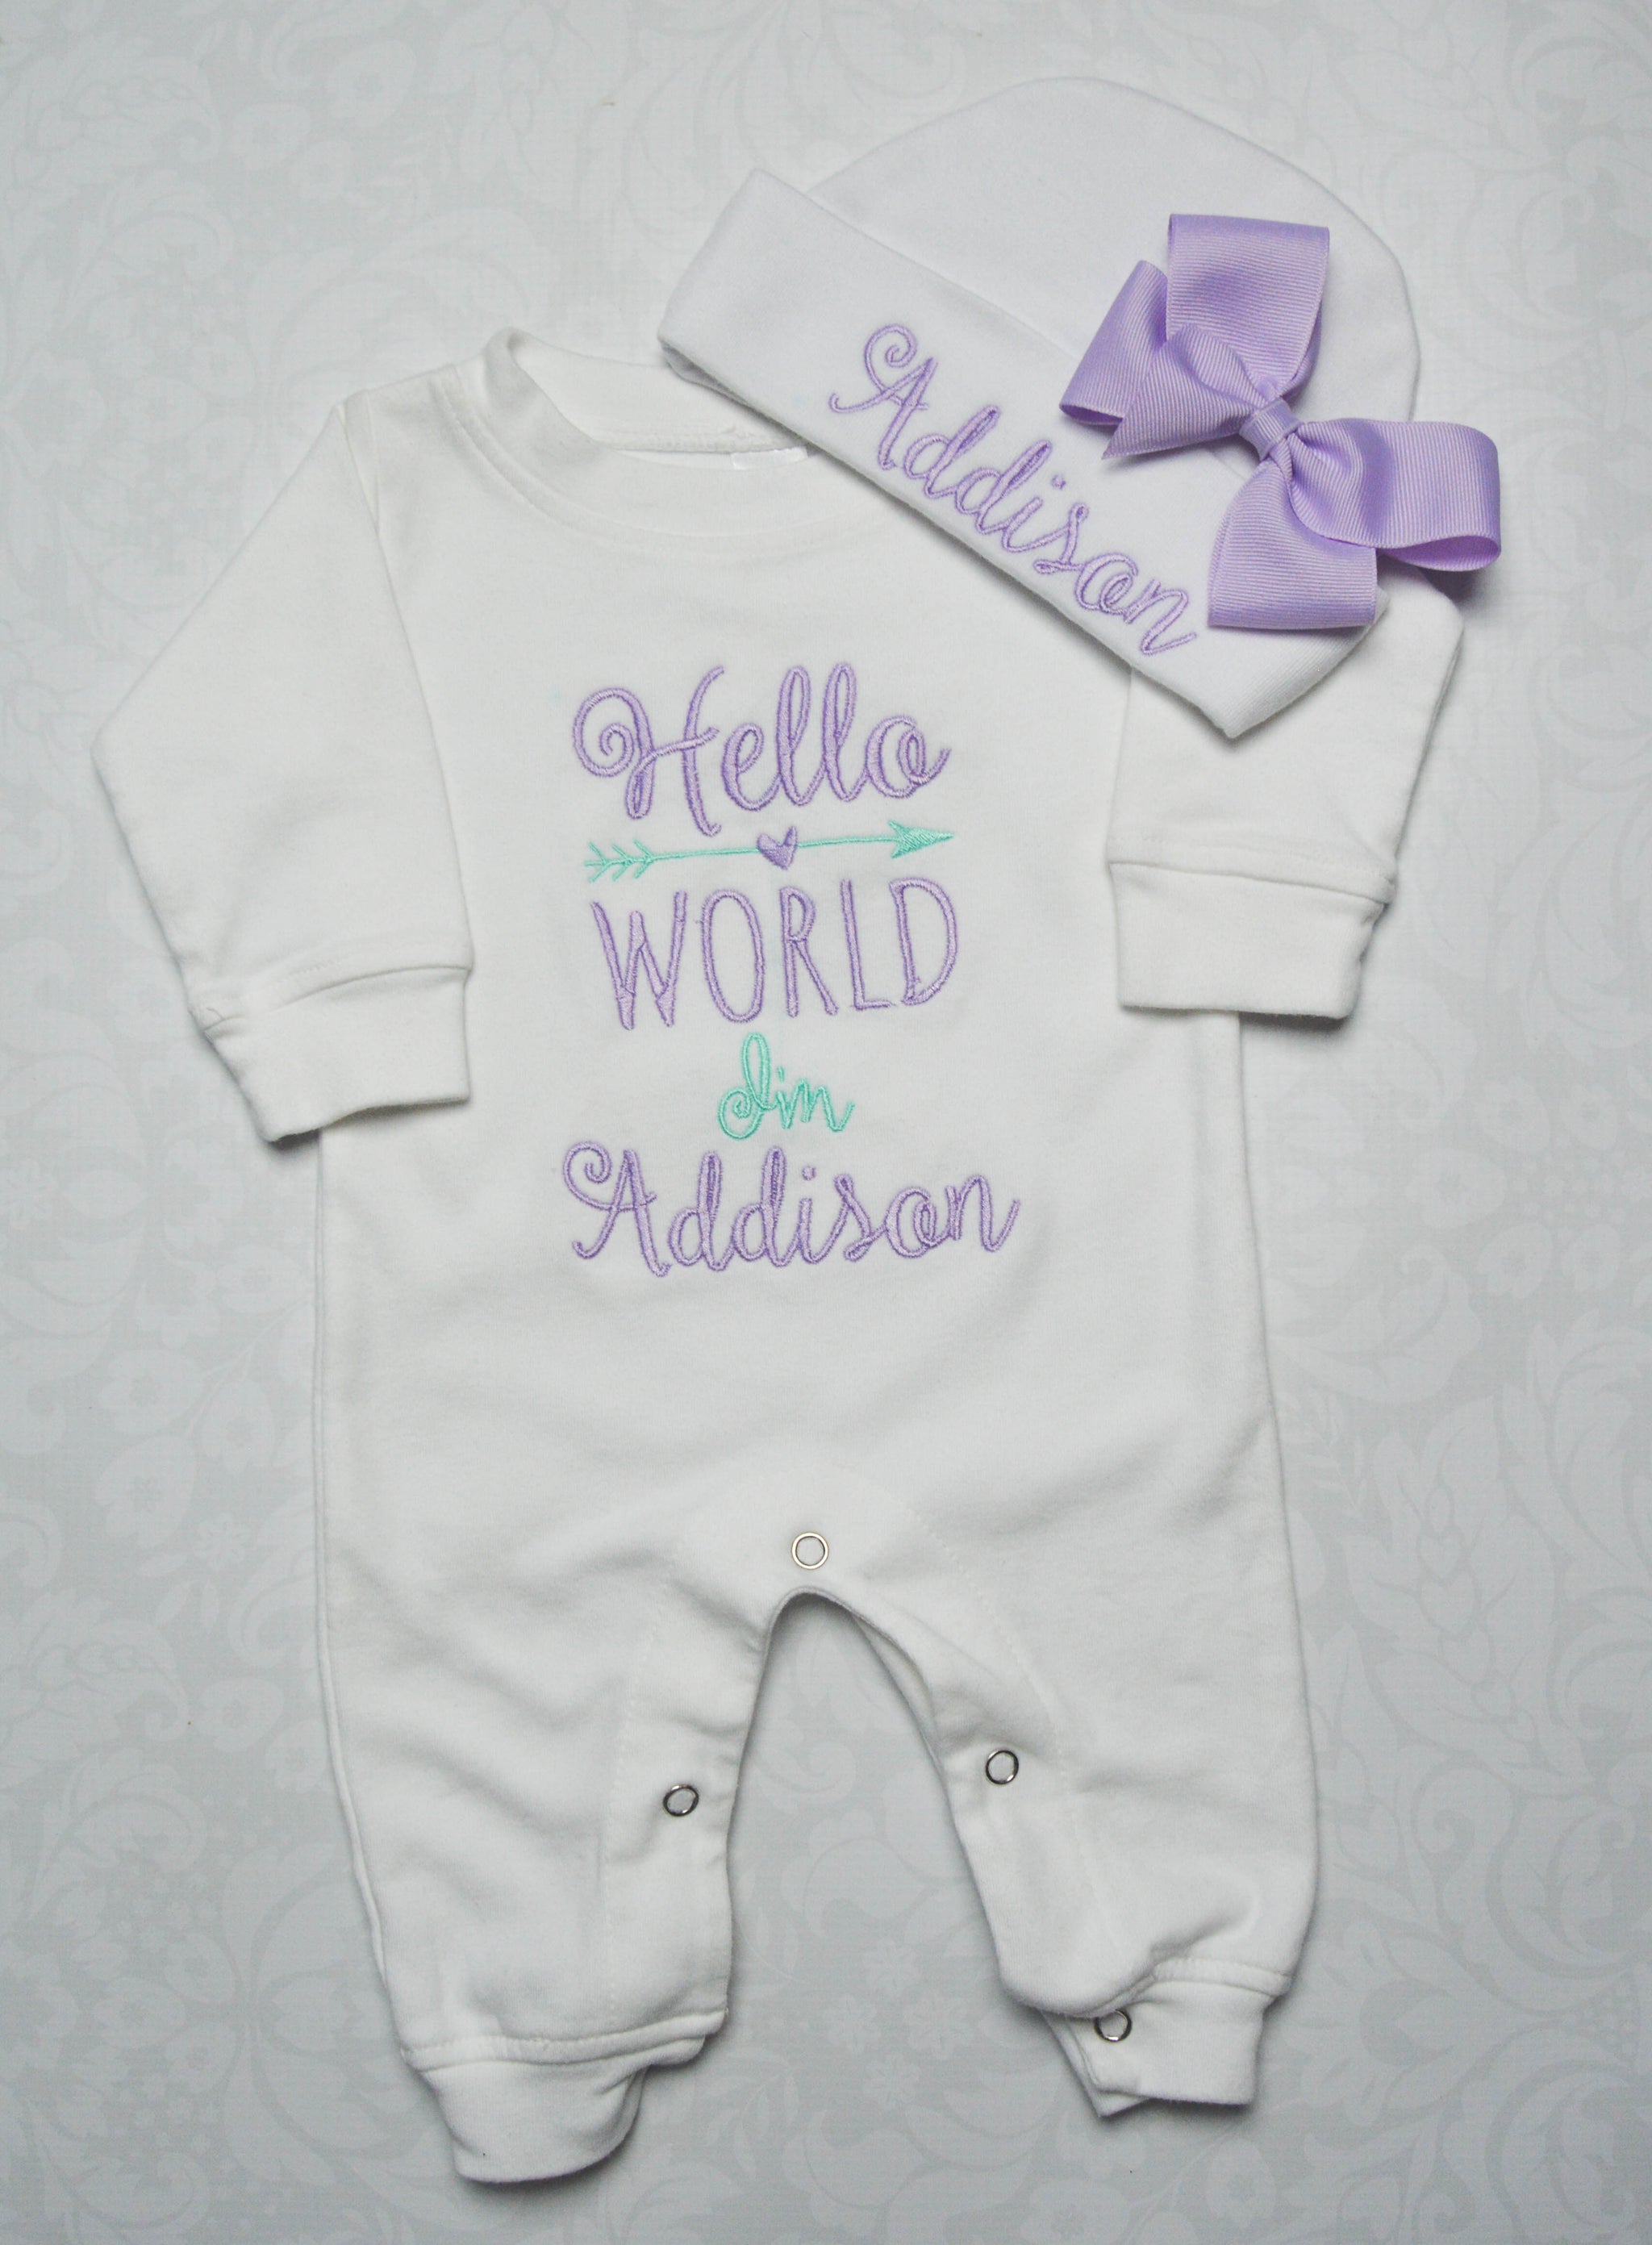 hello world baby outfit